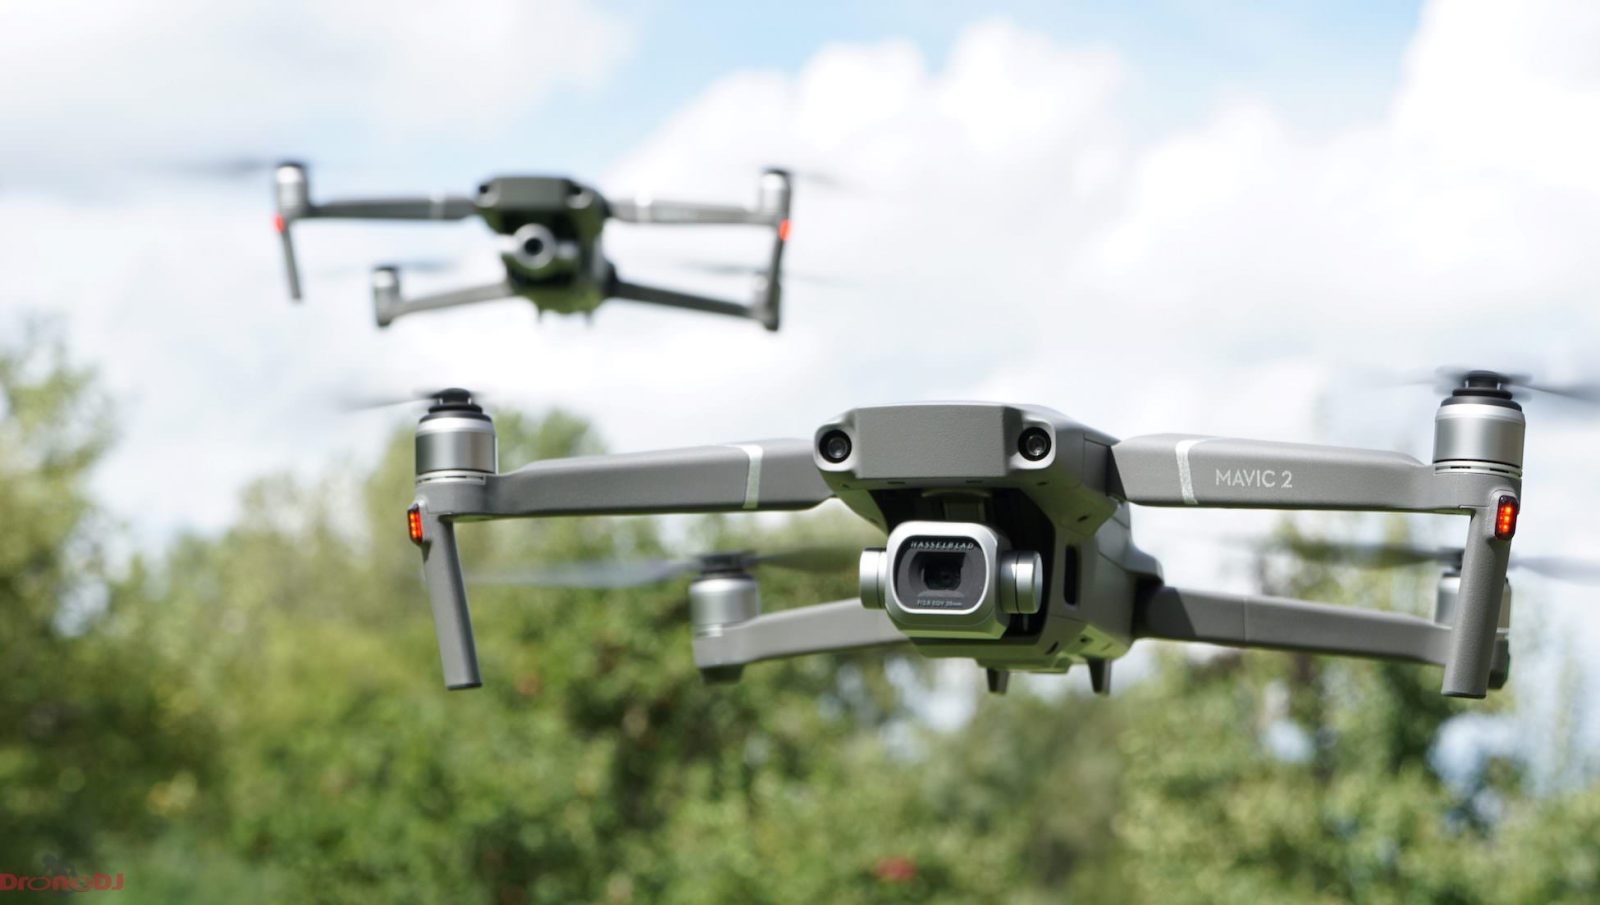 New FAA requirement: display the FAA registration number on outside of drone